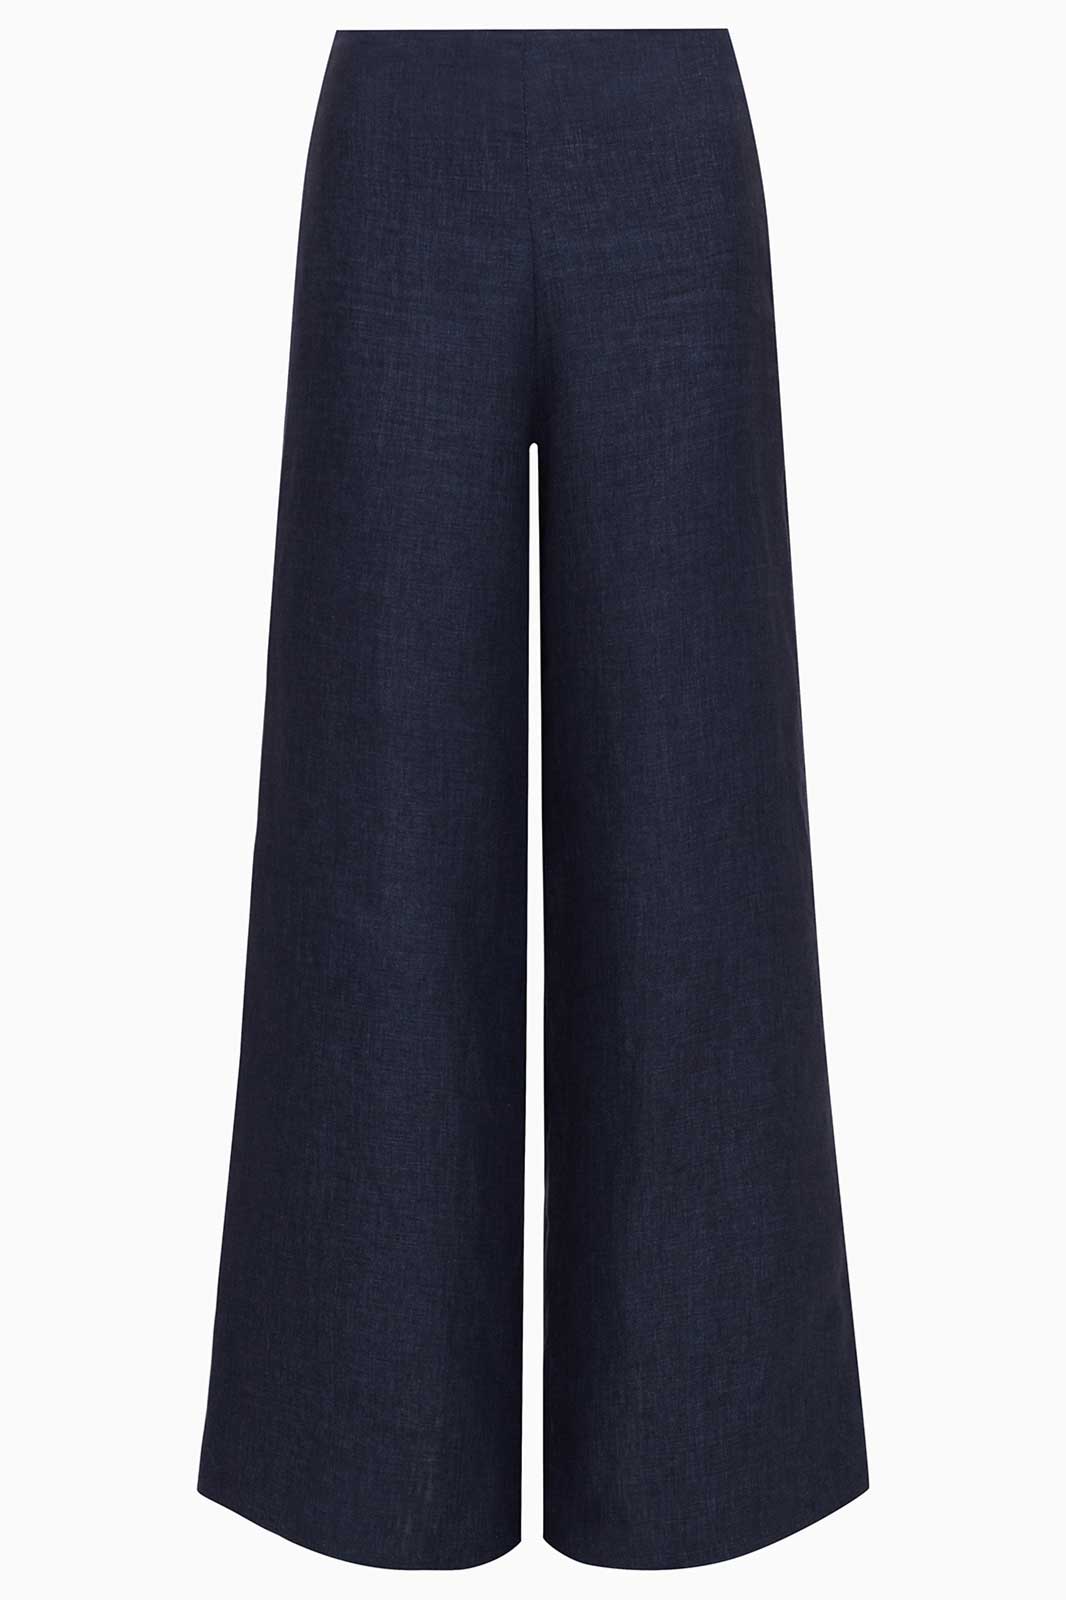 arkitaip Trousers The Clara Wide Leg Linen Trousers in denim blue - Sample